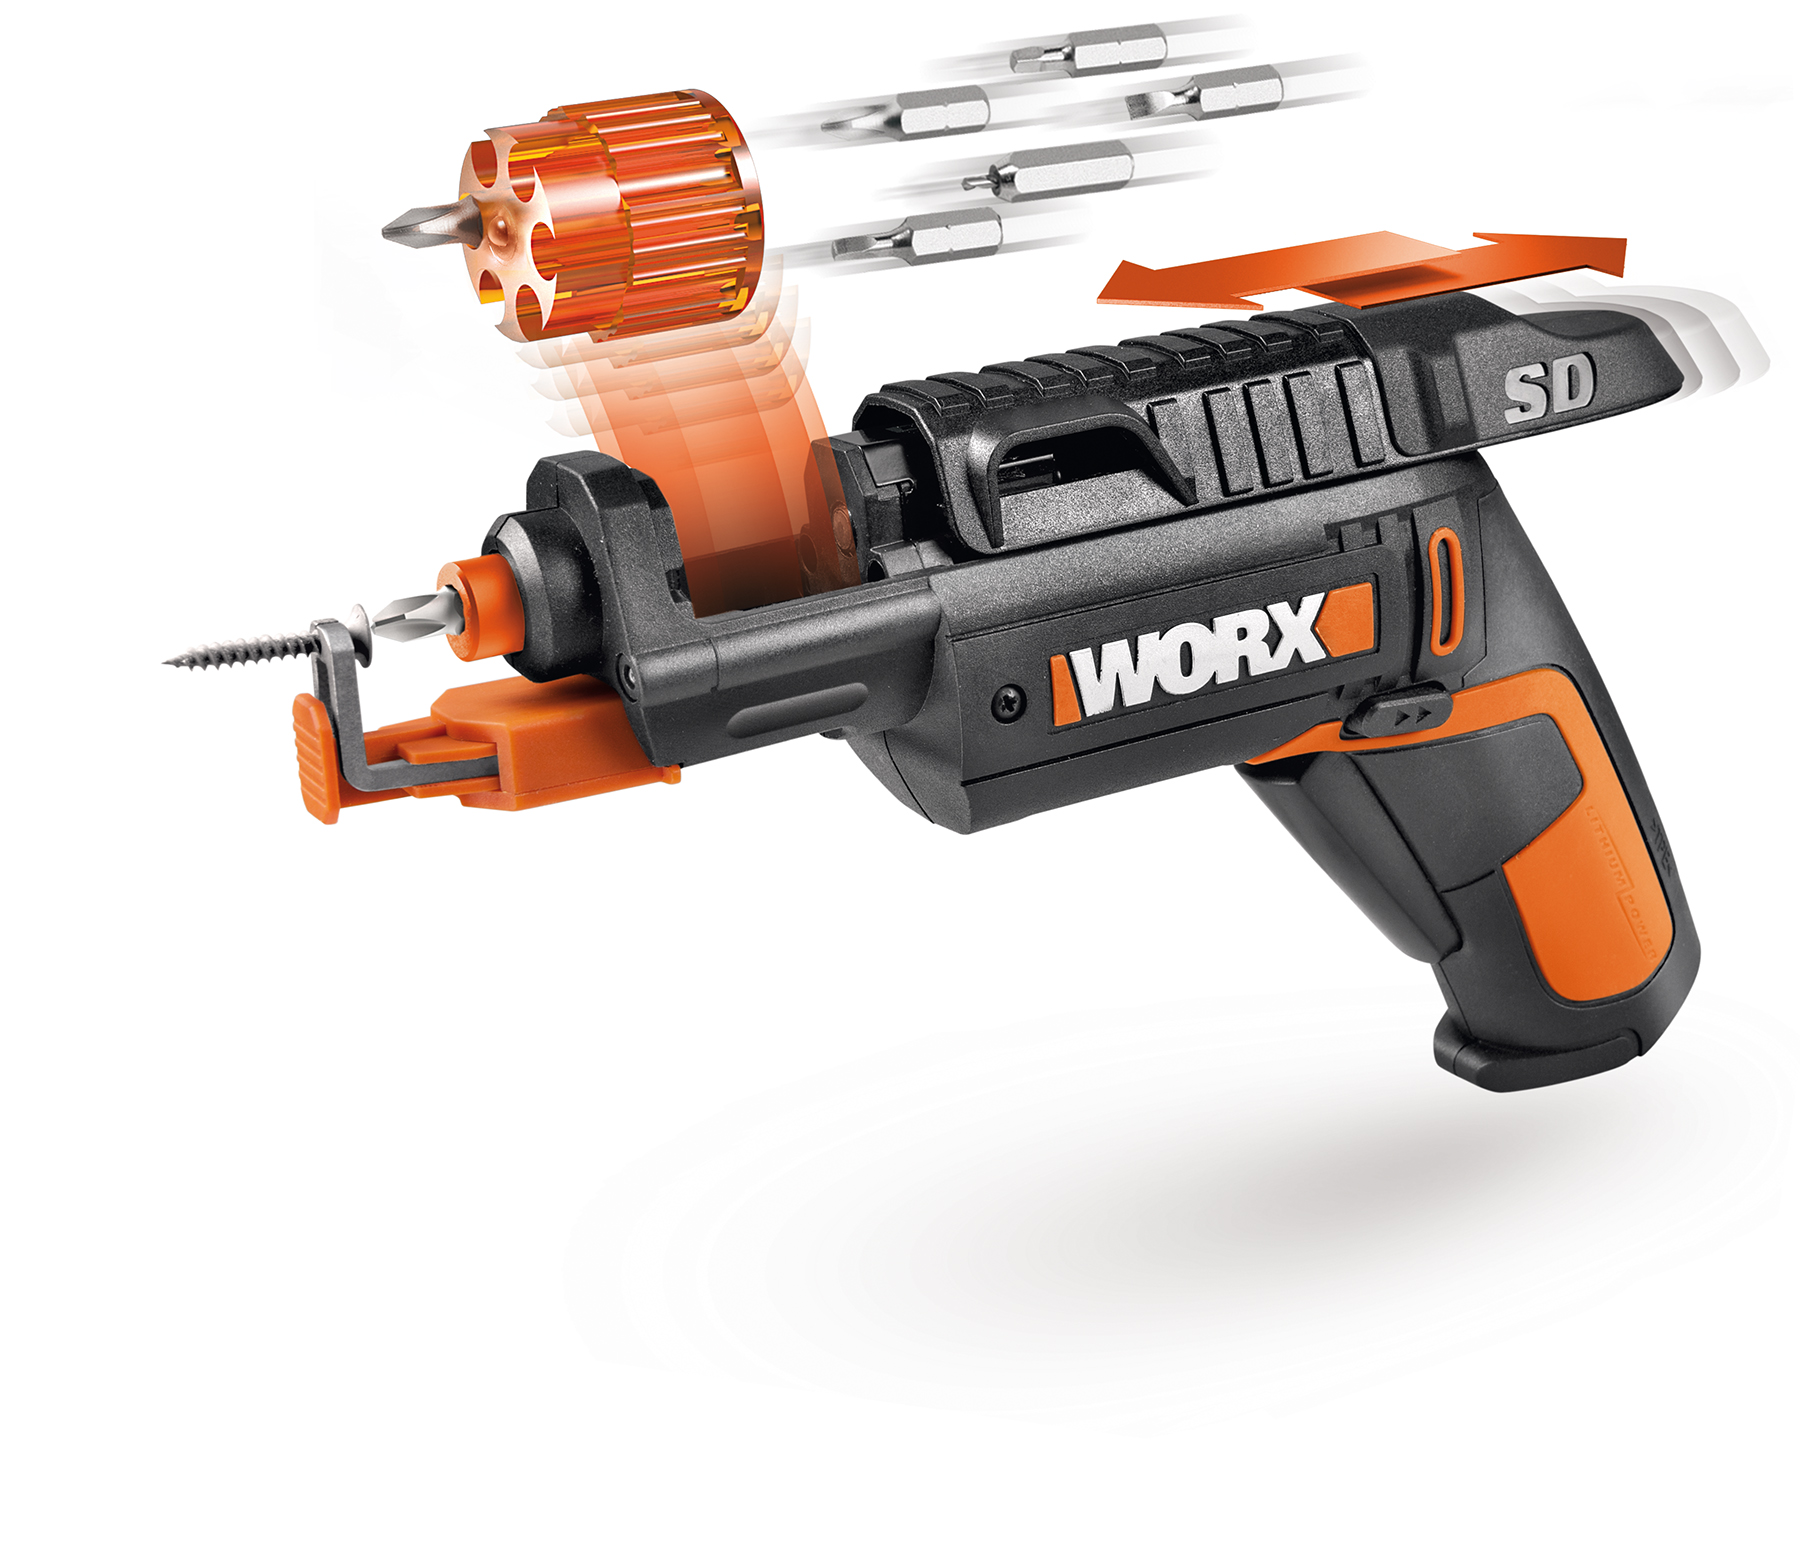 WORX SD SemiAutomatic Driver with Screw Holder features six-slot revolving chamber that rotates an assortment of bits in and out as needed.